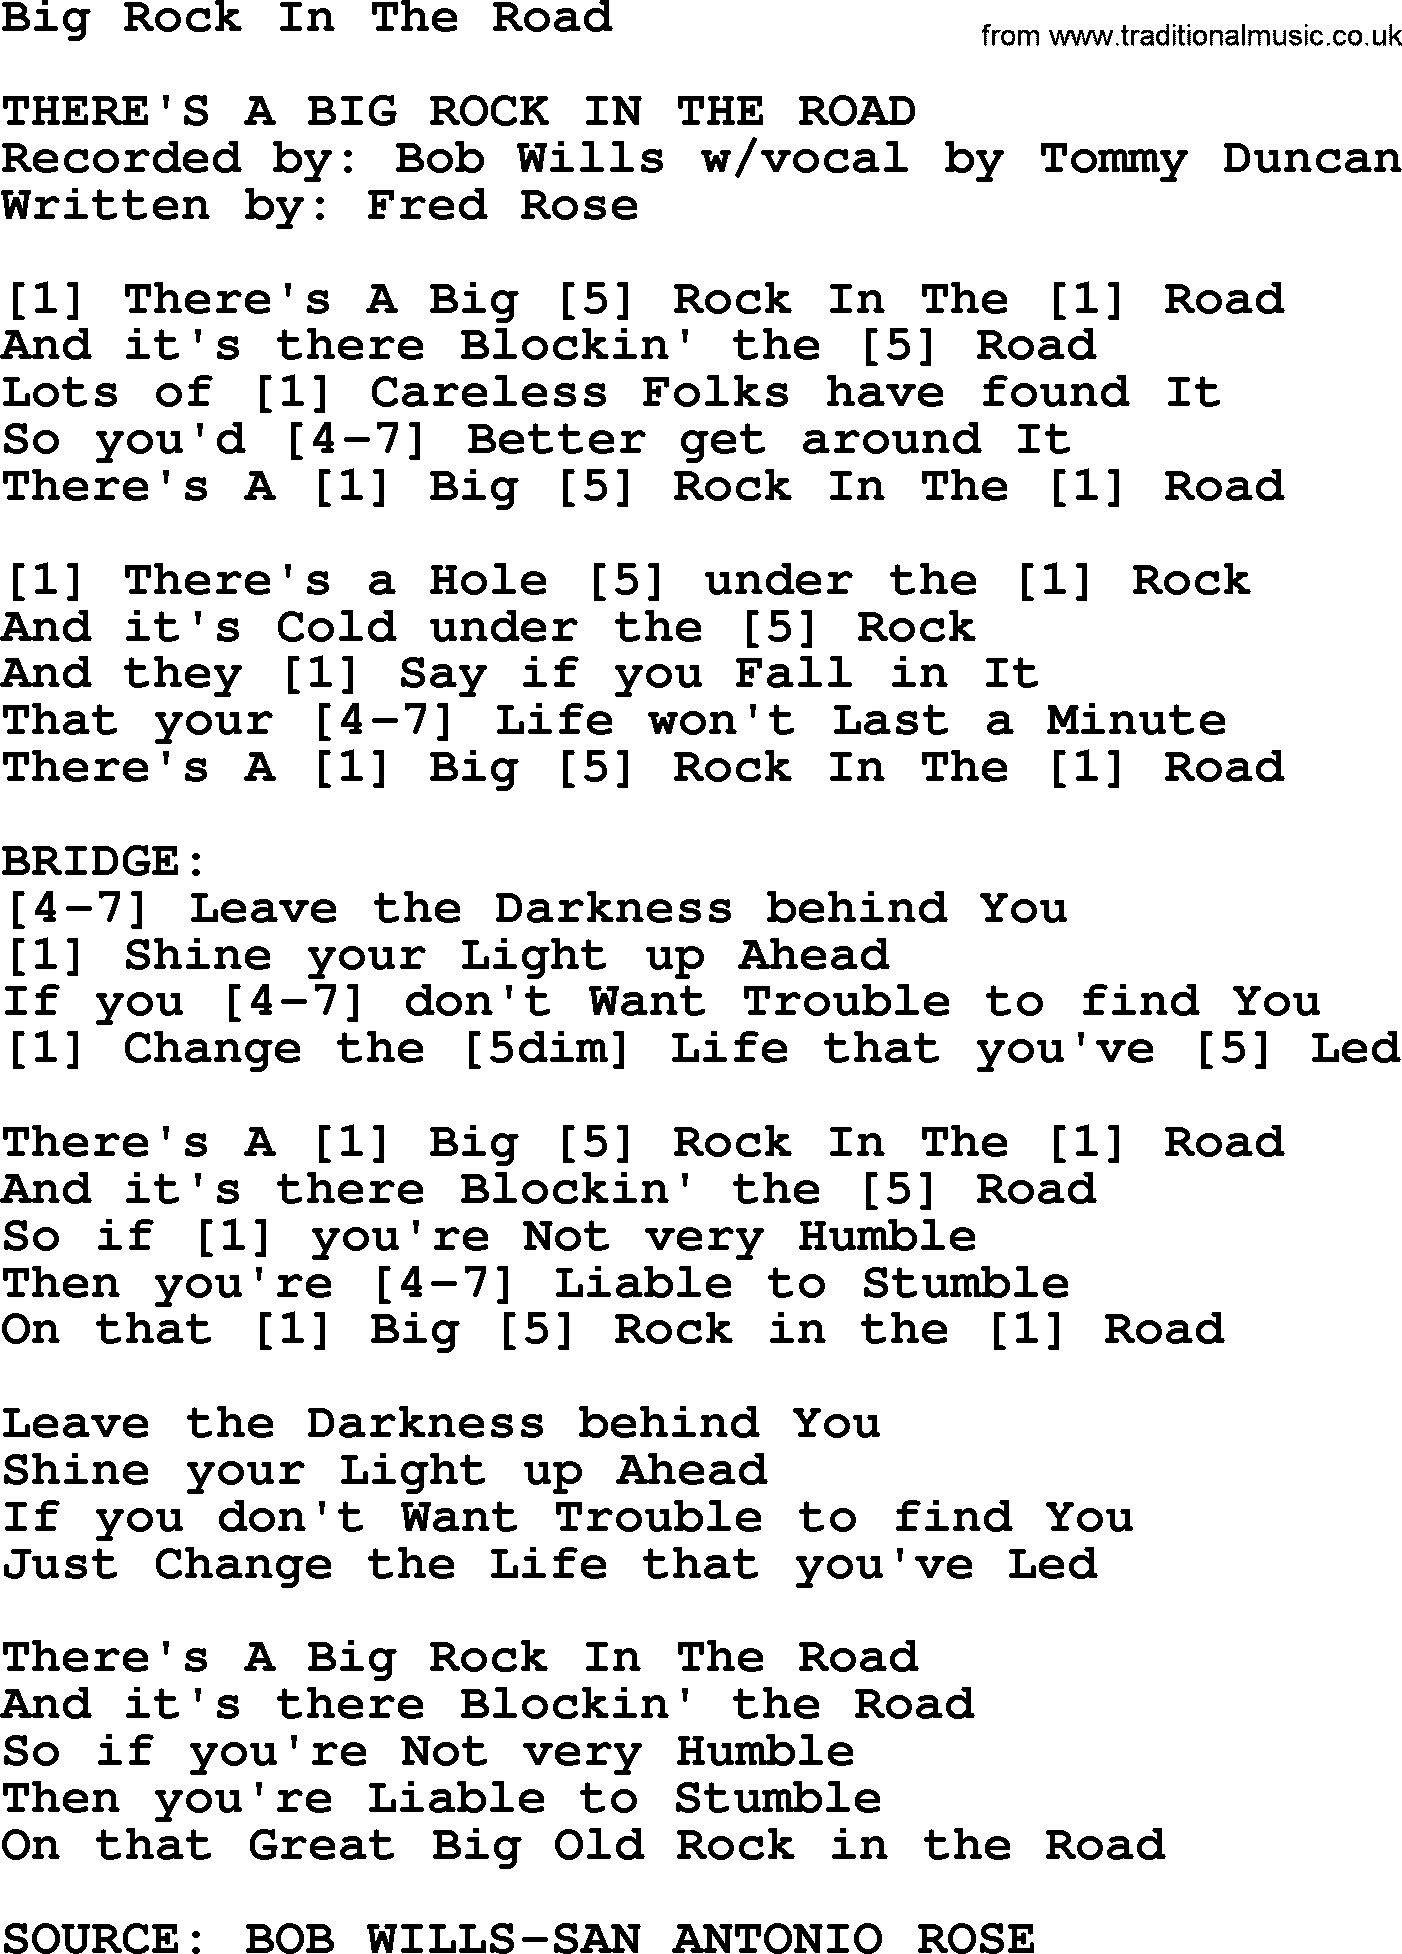 Bluegrass song: Big Rock In The Road, lyrics and chords